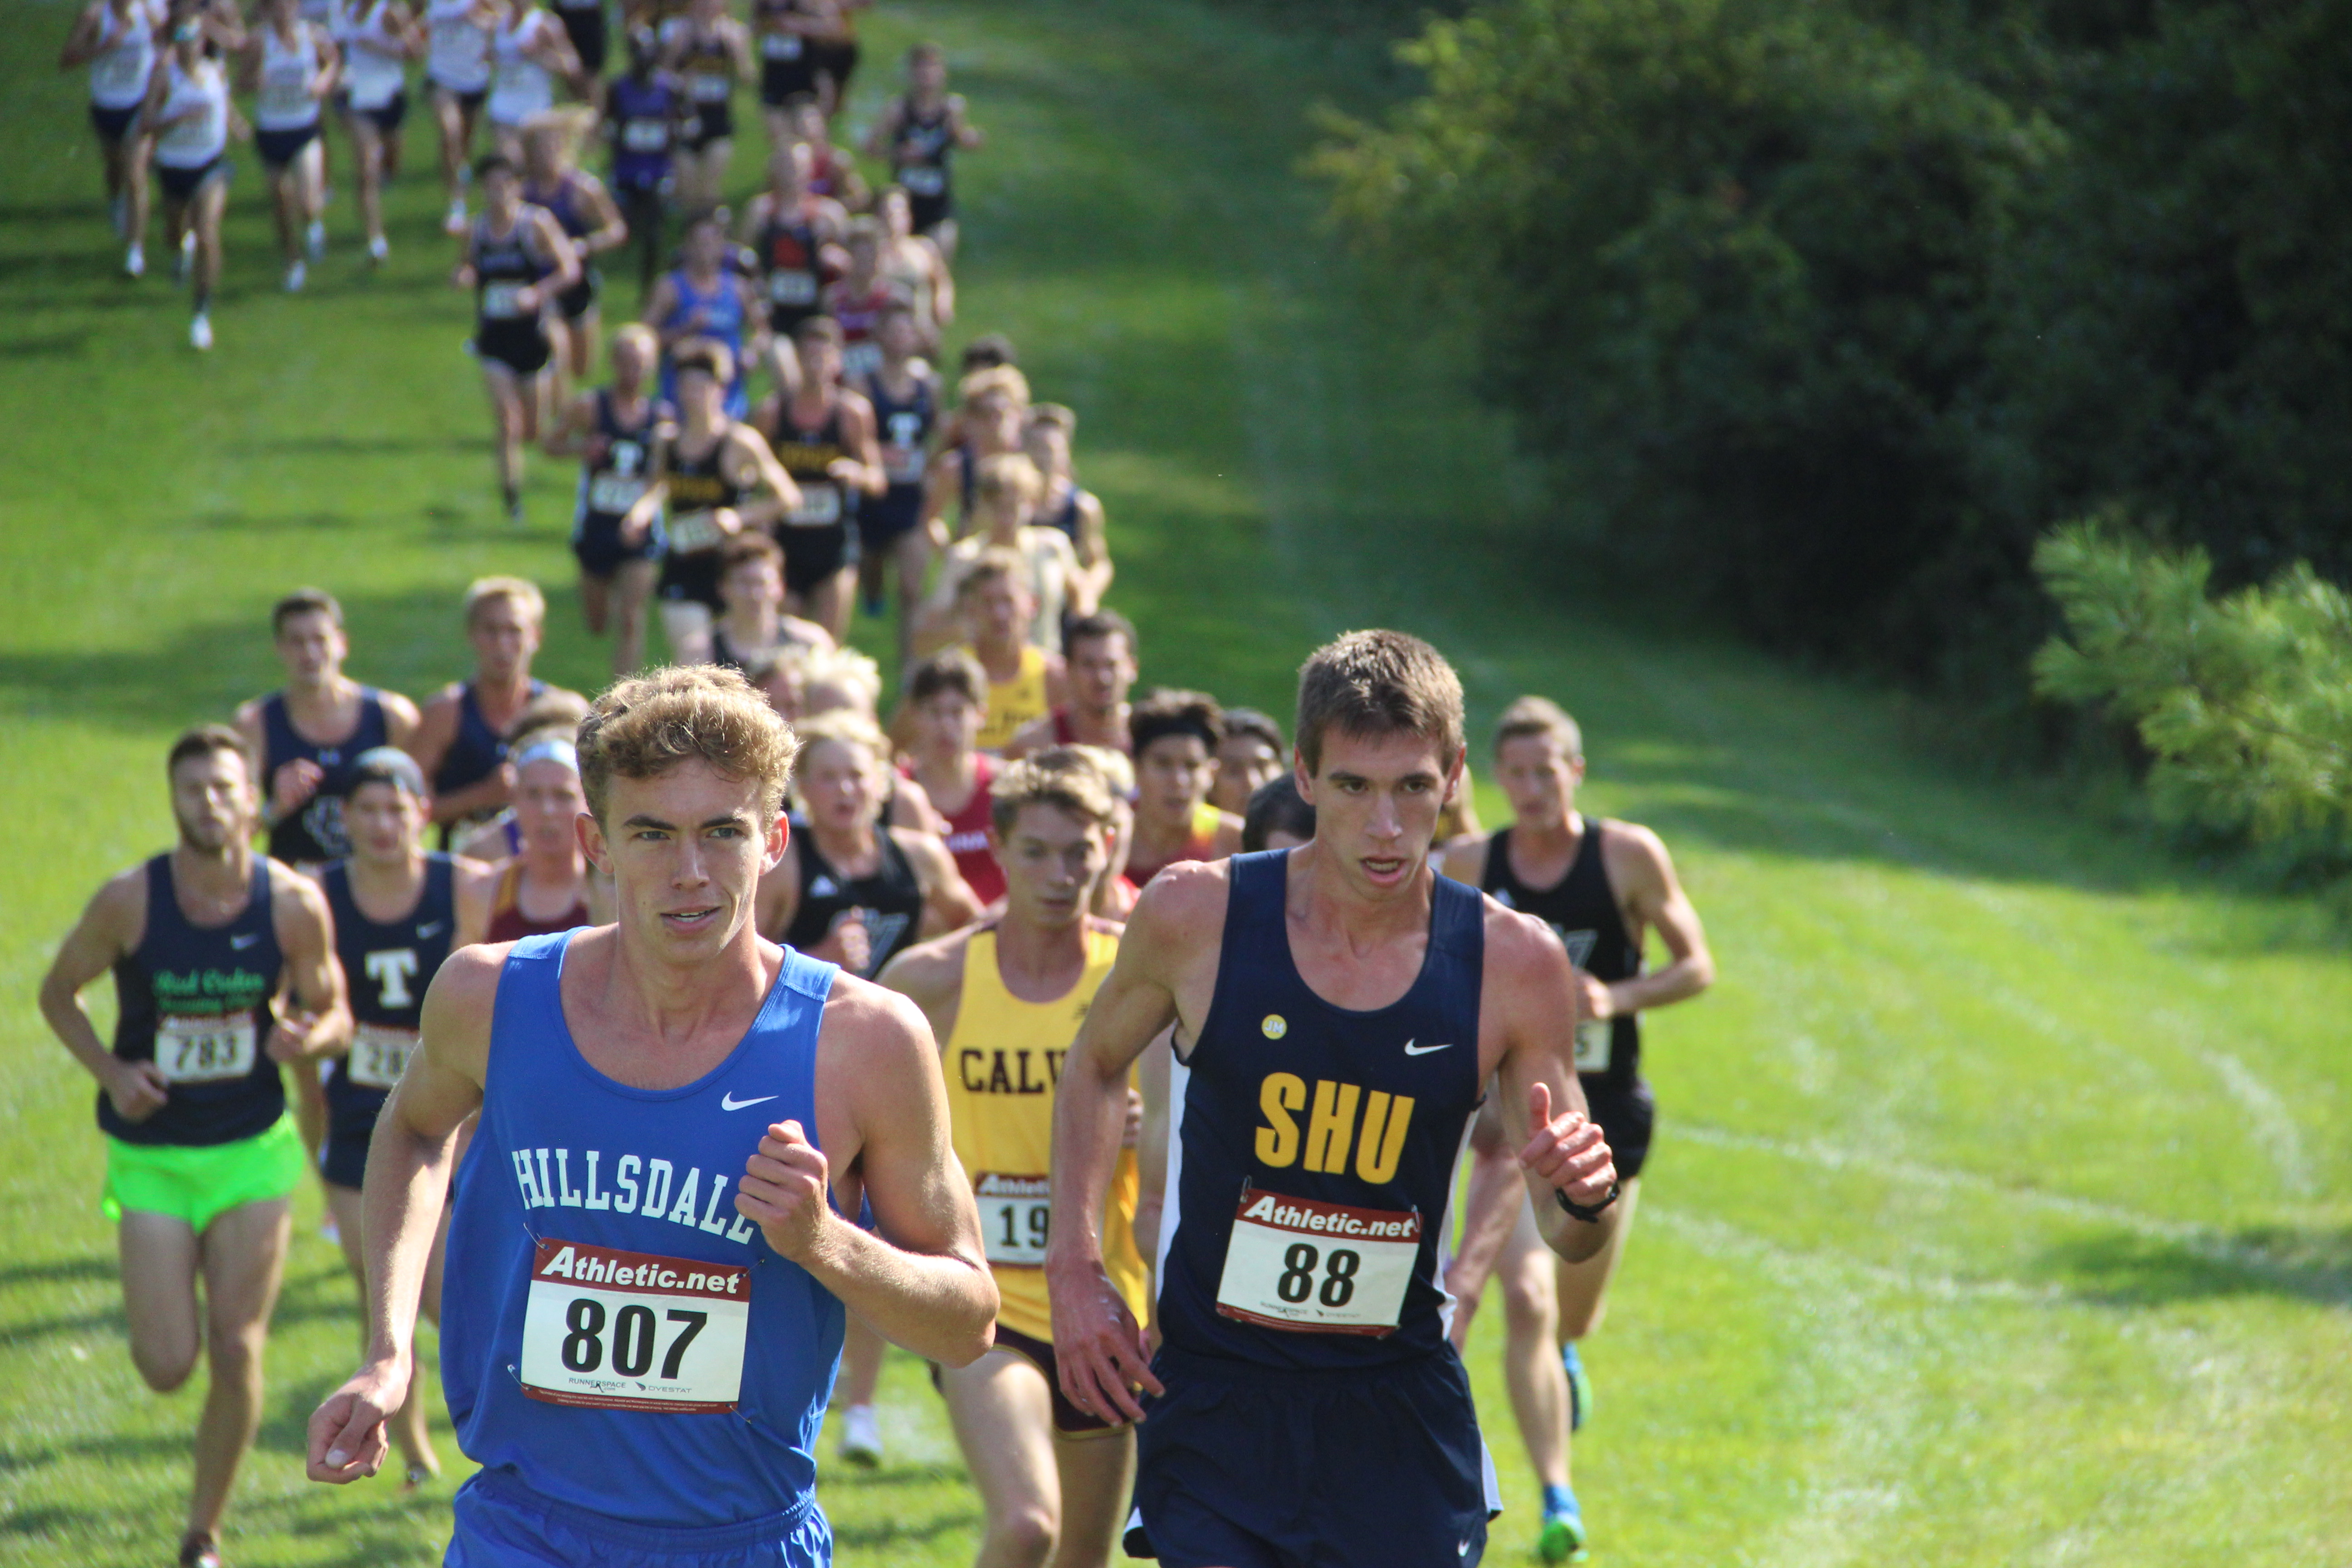 Chargers set to race in Regionals